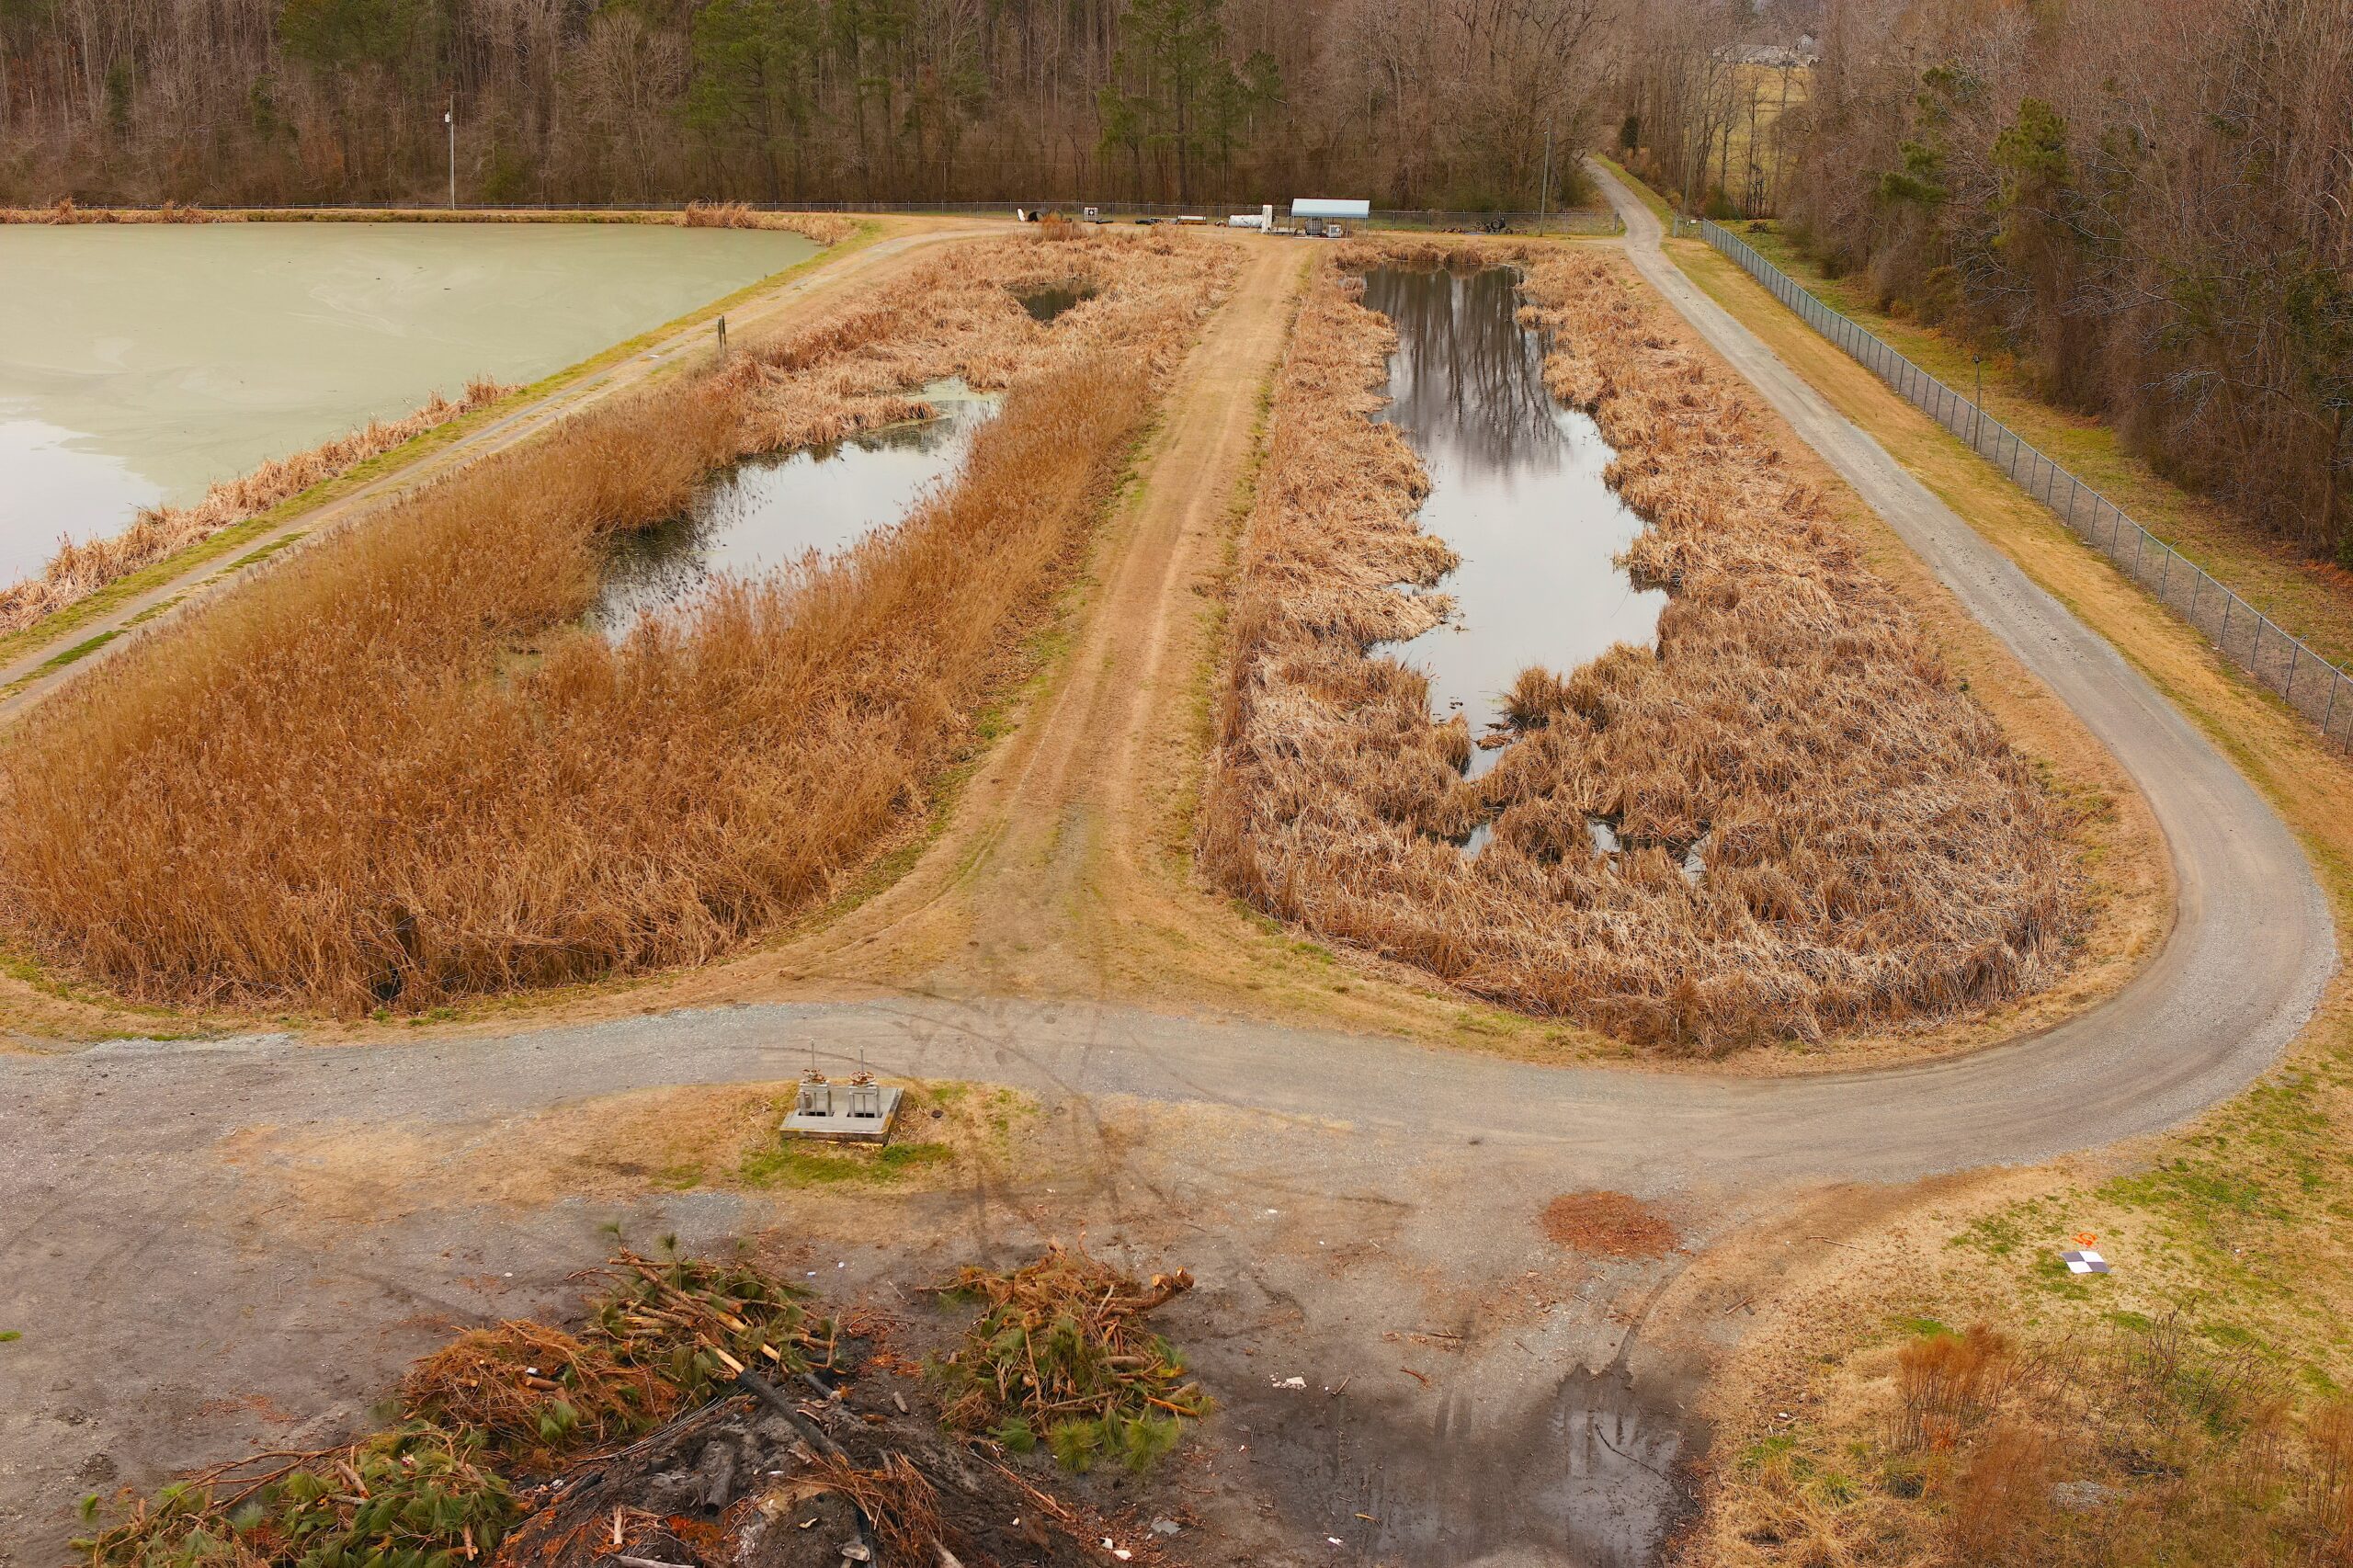 image: a wastewater treatment plant in the middle of a wetland.